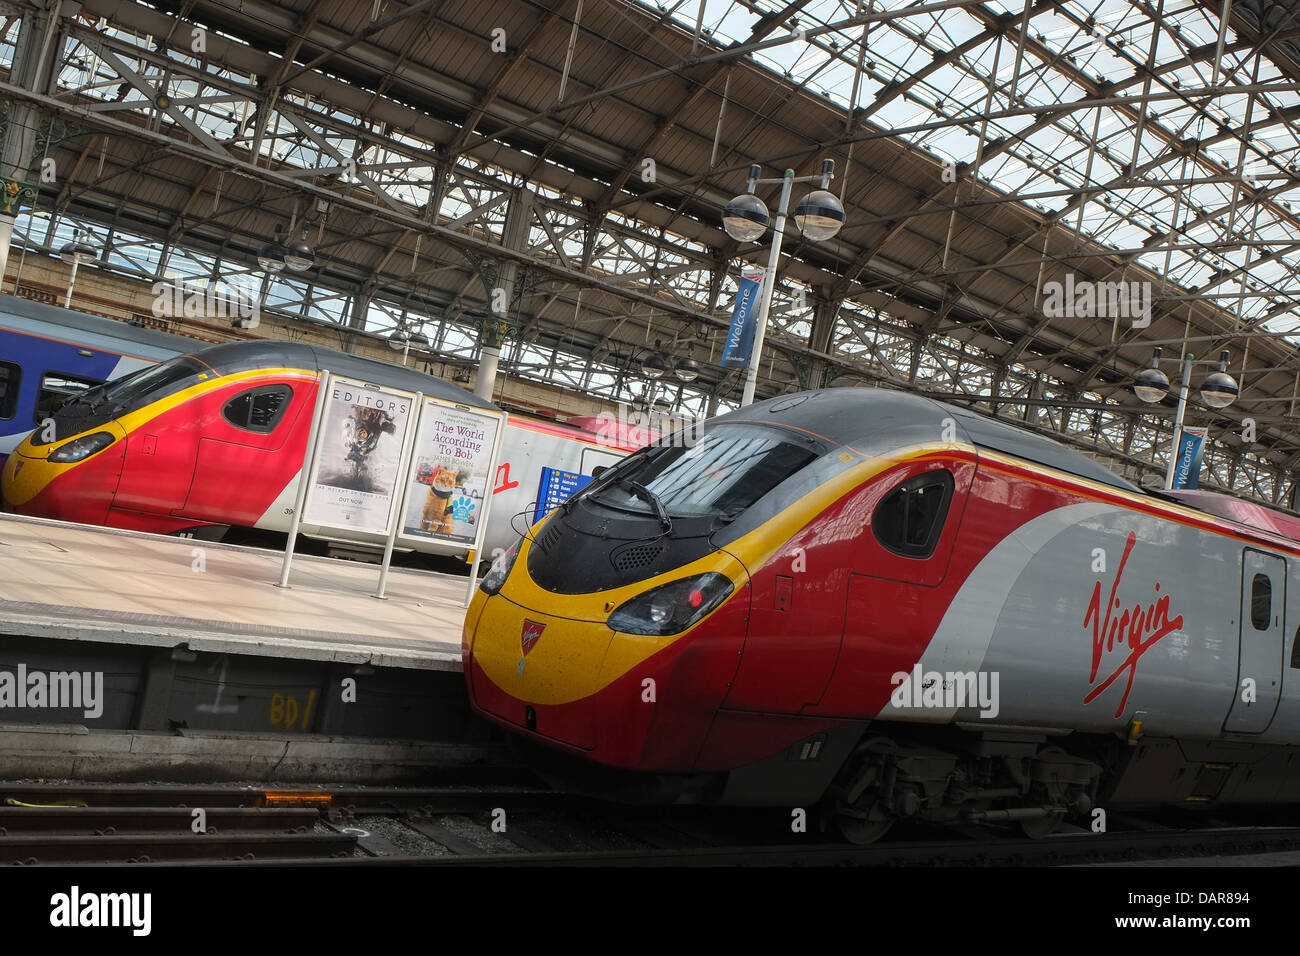 England, Manchester, Piccadilly Rail Station, Virgin Train Stock Photo